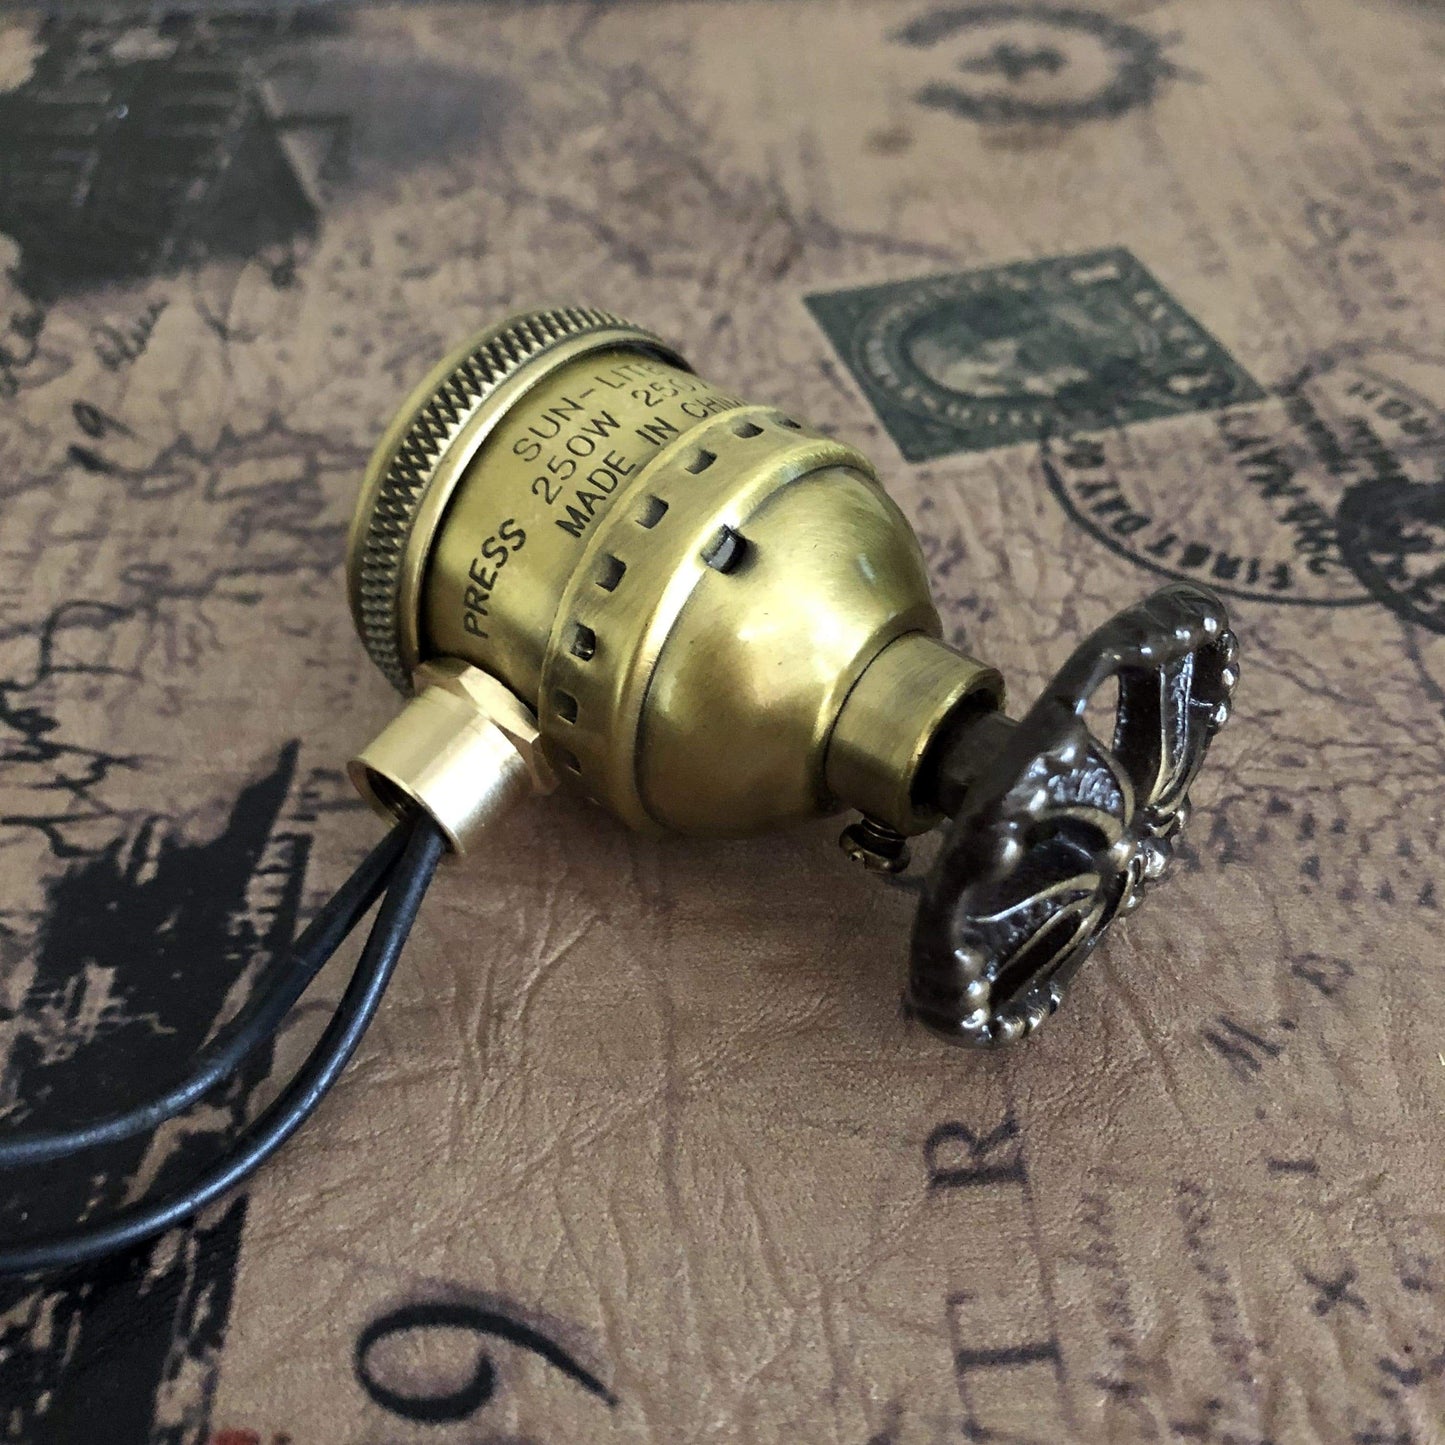 Steampunk Lamp Dimmer Switch - Antique lamp parts by MillerLight